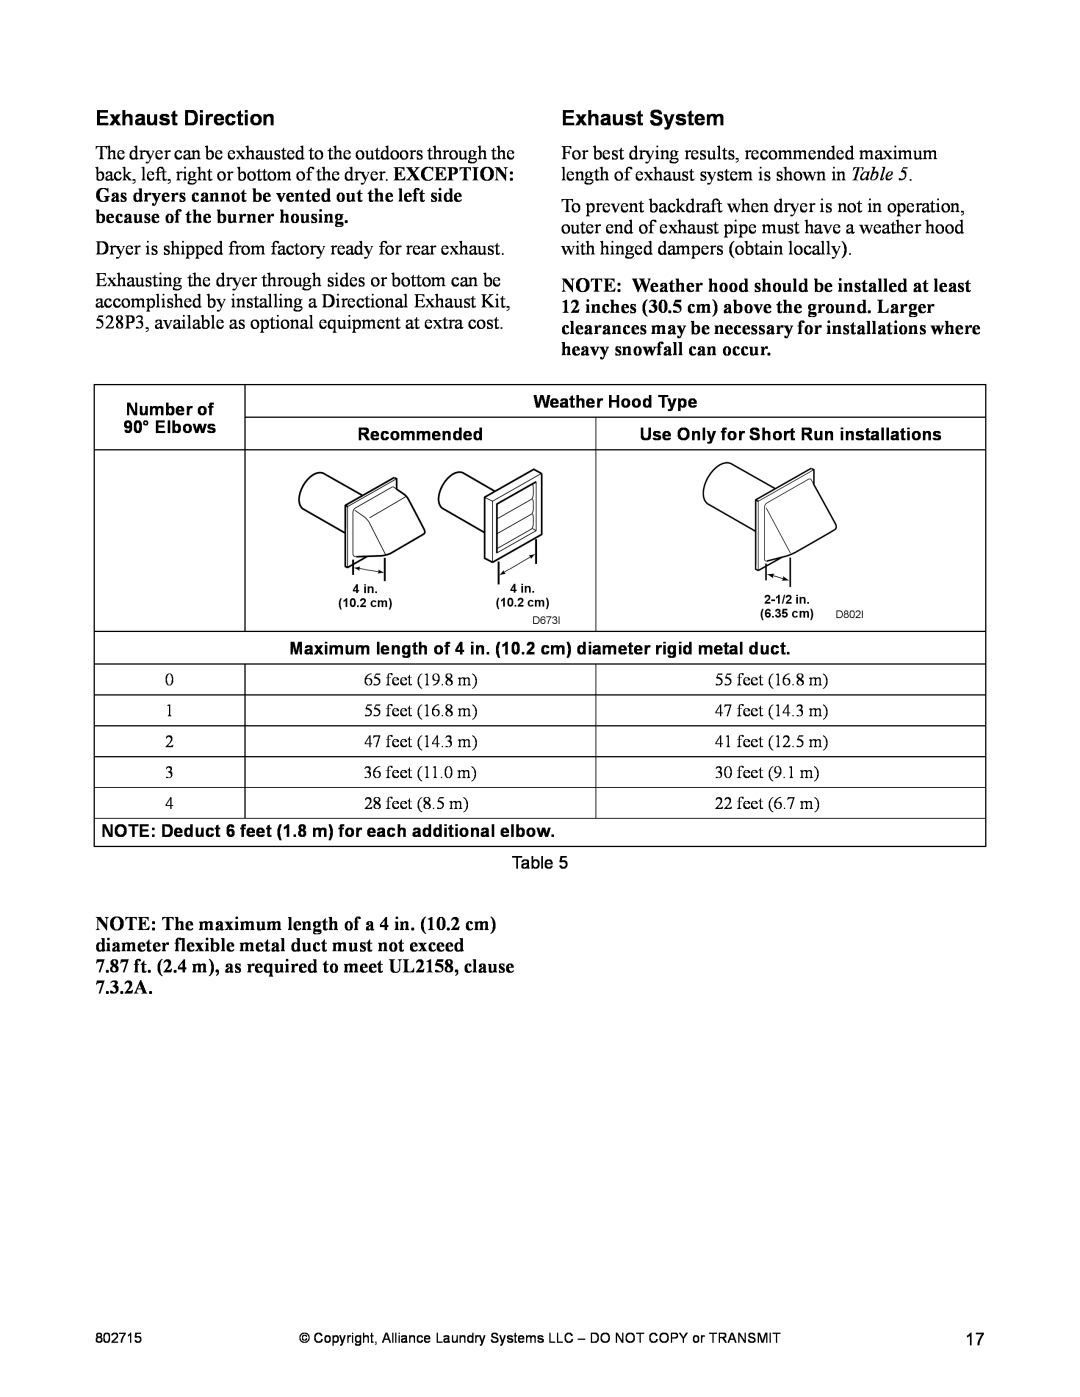 Alliance Laundry Systems Dishwasher manual Exhaust Direction, Exhaust System 